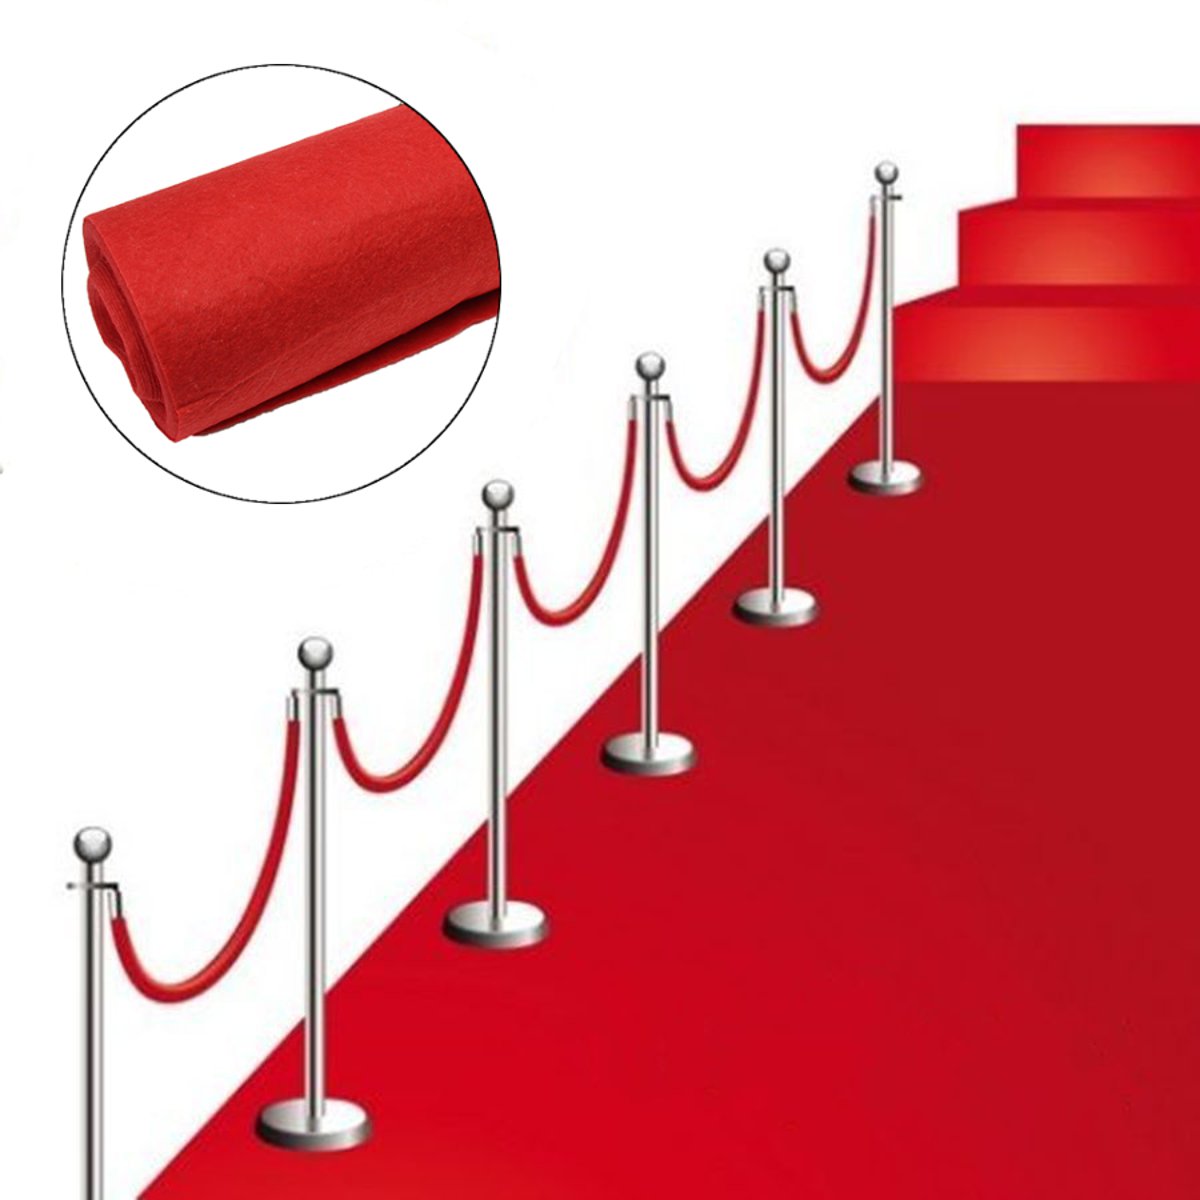 40ftx4ft-Large-Red-Carpet-Wedding-Birthday-Aisle-Floor-Runner-Hollywood-Party-Decoration-Prop-1399151